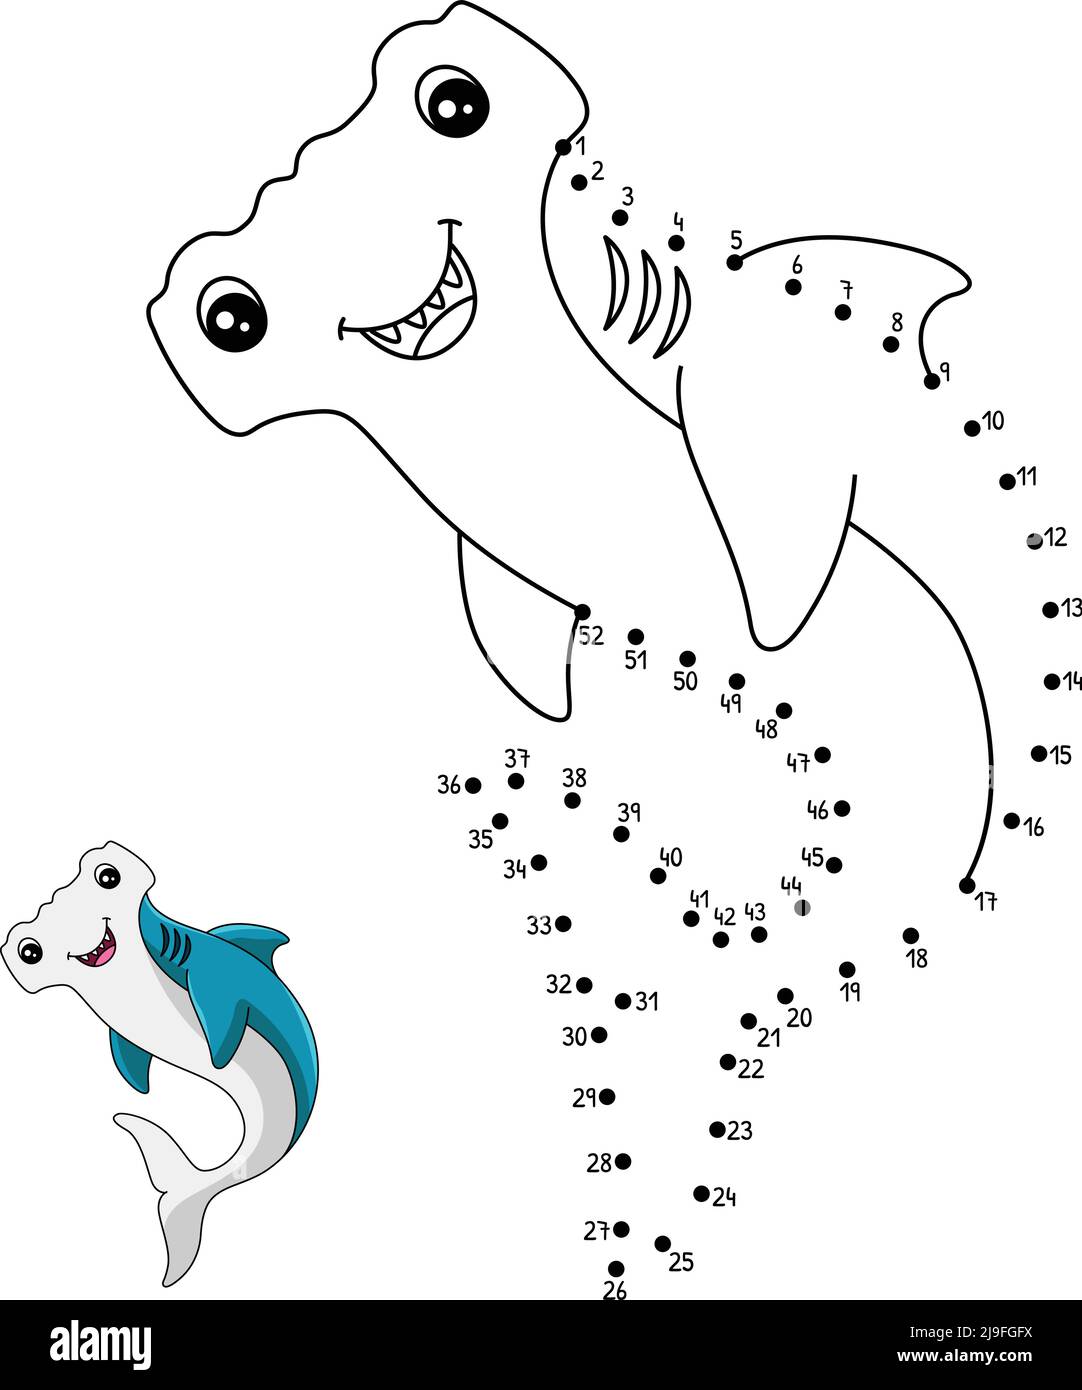 Dot to Dot Hammerhead Shark Coloring Page for Kids Stock Vector